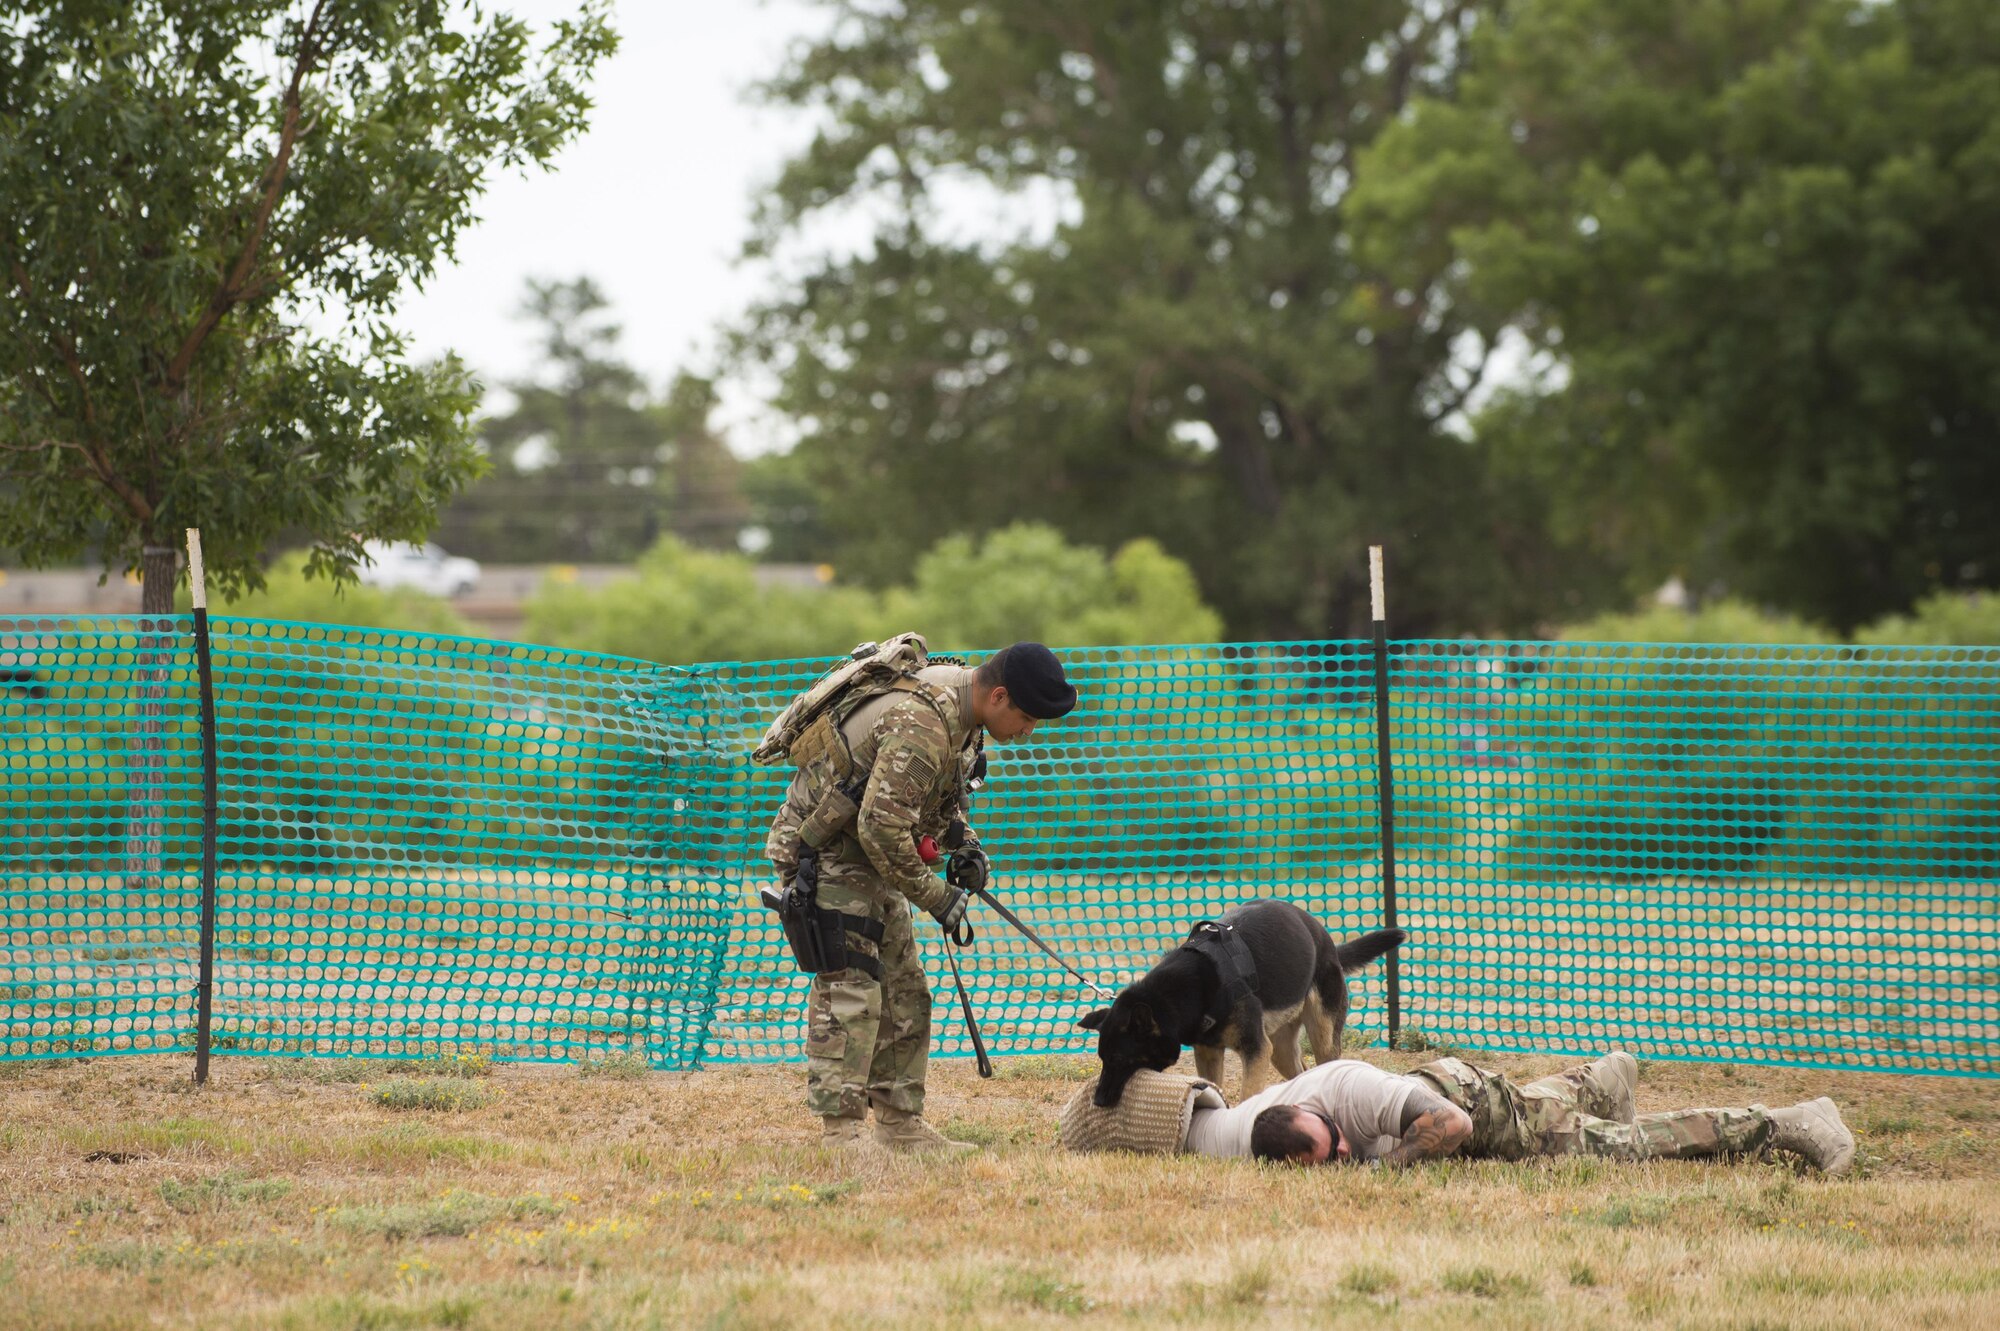 Eby, a military working dog, bites the protective sleeve of Senior Airman Richard Garcia, 90th Security Forces Squadron military working dog handler, during a MWD demonstration at Fort D.A. Russell Days on F.E. Warren Air Force Base, Wyo., July 21, 2017. Attack training prepares the MWD and the handler for real life situations that could happen on their patrol. This year marks the 150th anniversary of F.E. Warren Air Force Base, and the annual base open house brings military and civilian communities together to learn more about the base’s rich history. (U.S. Air Force photo by Staff Sgt. Christopher Ruano)